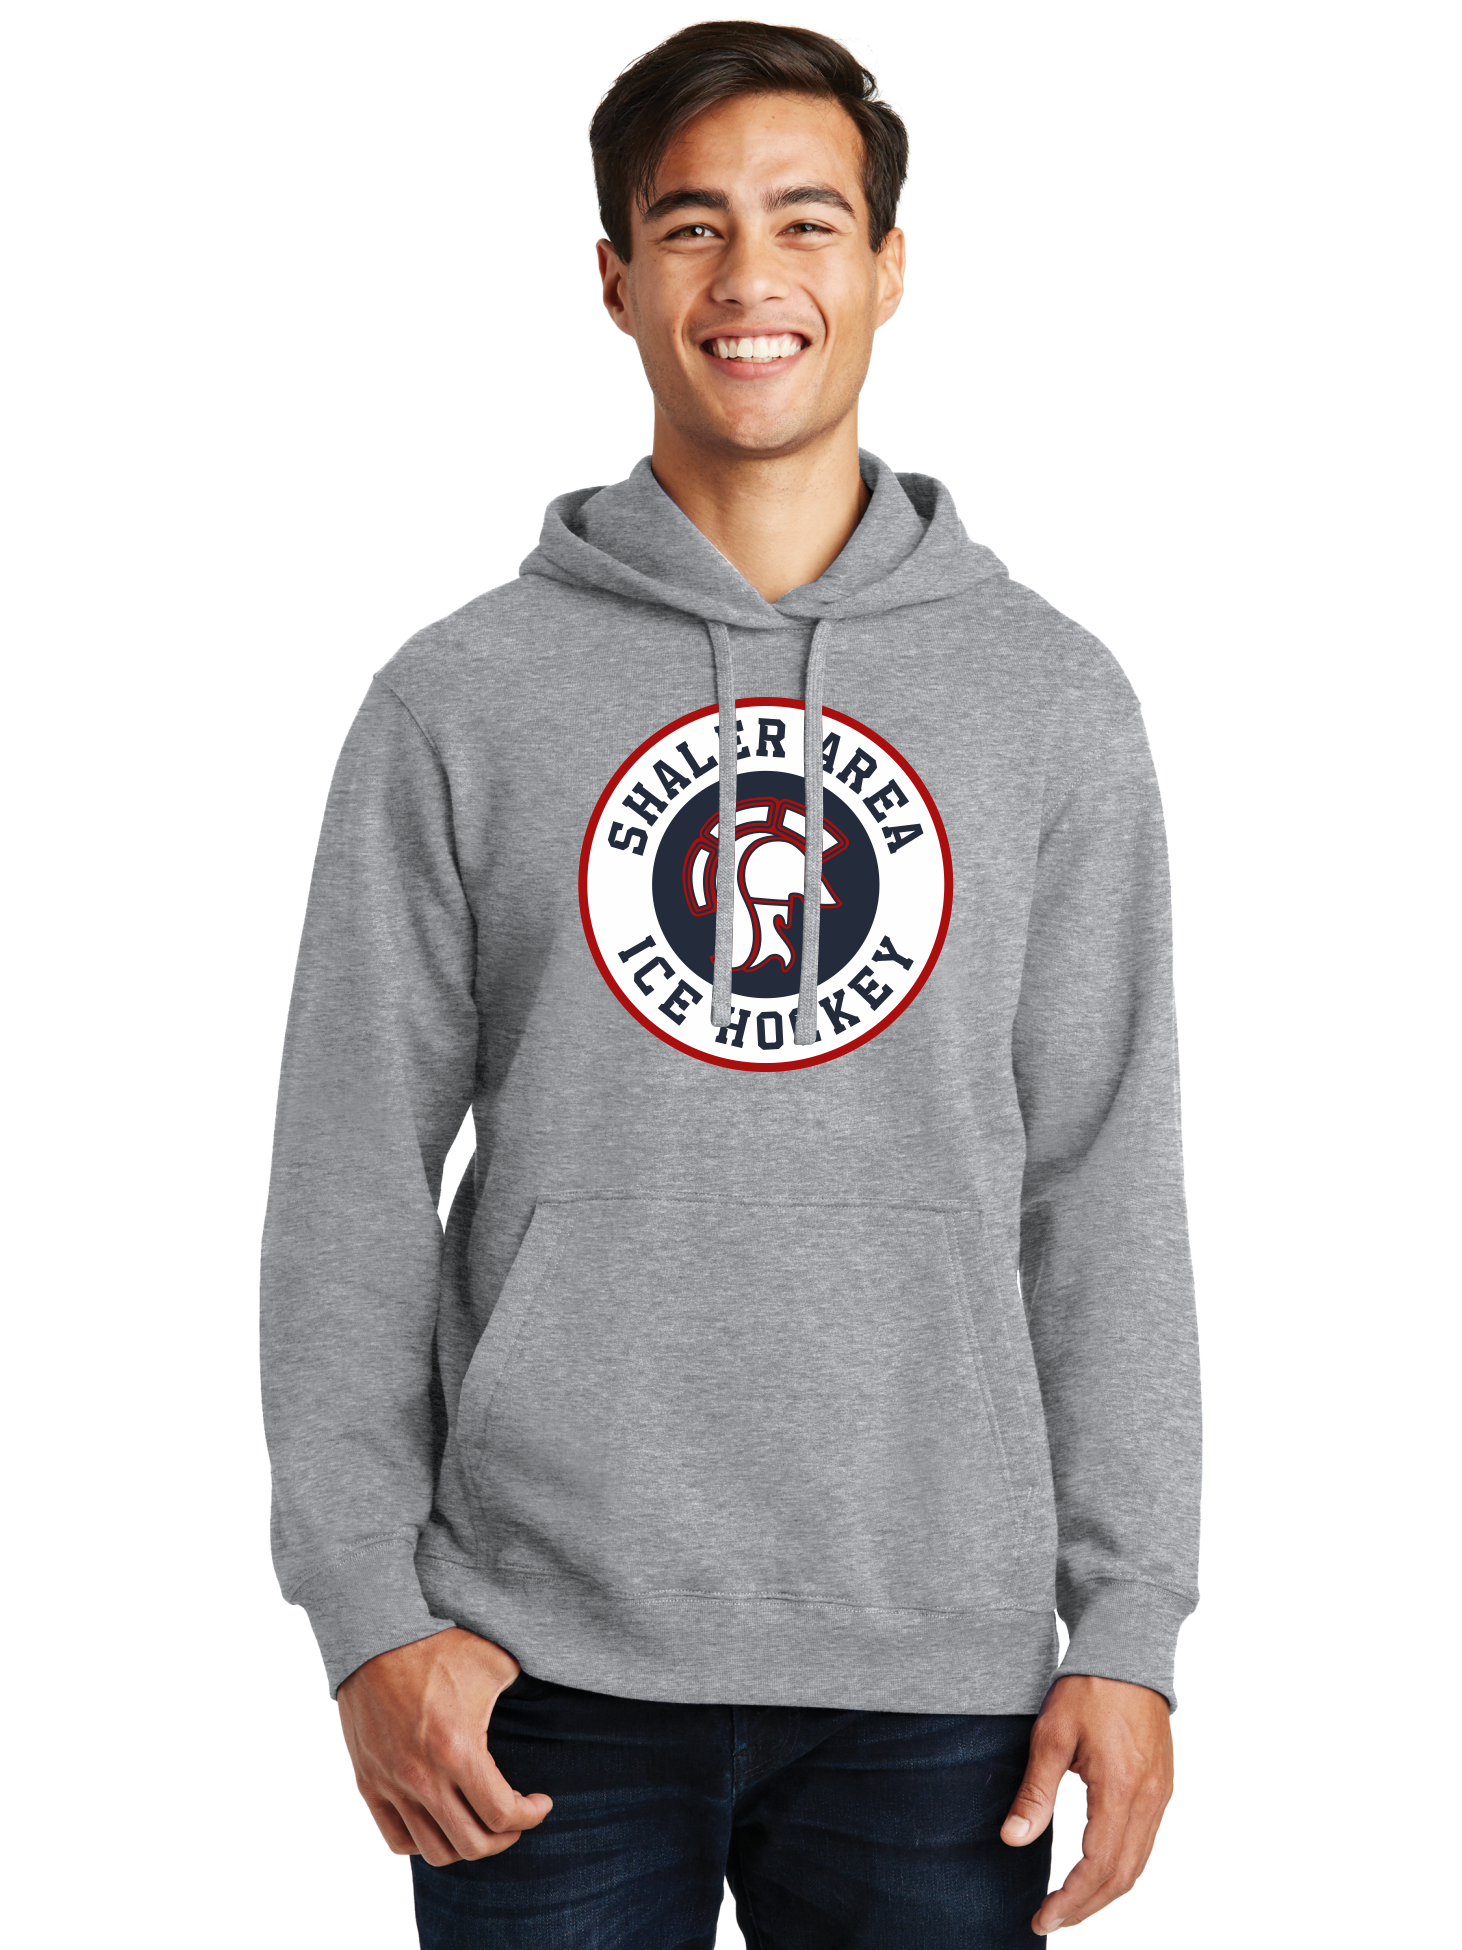 Logo Hoodie - Shaler - Multiple Colors Available